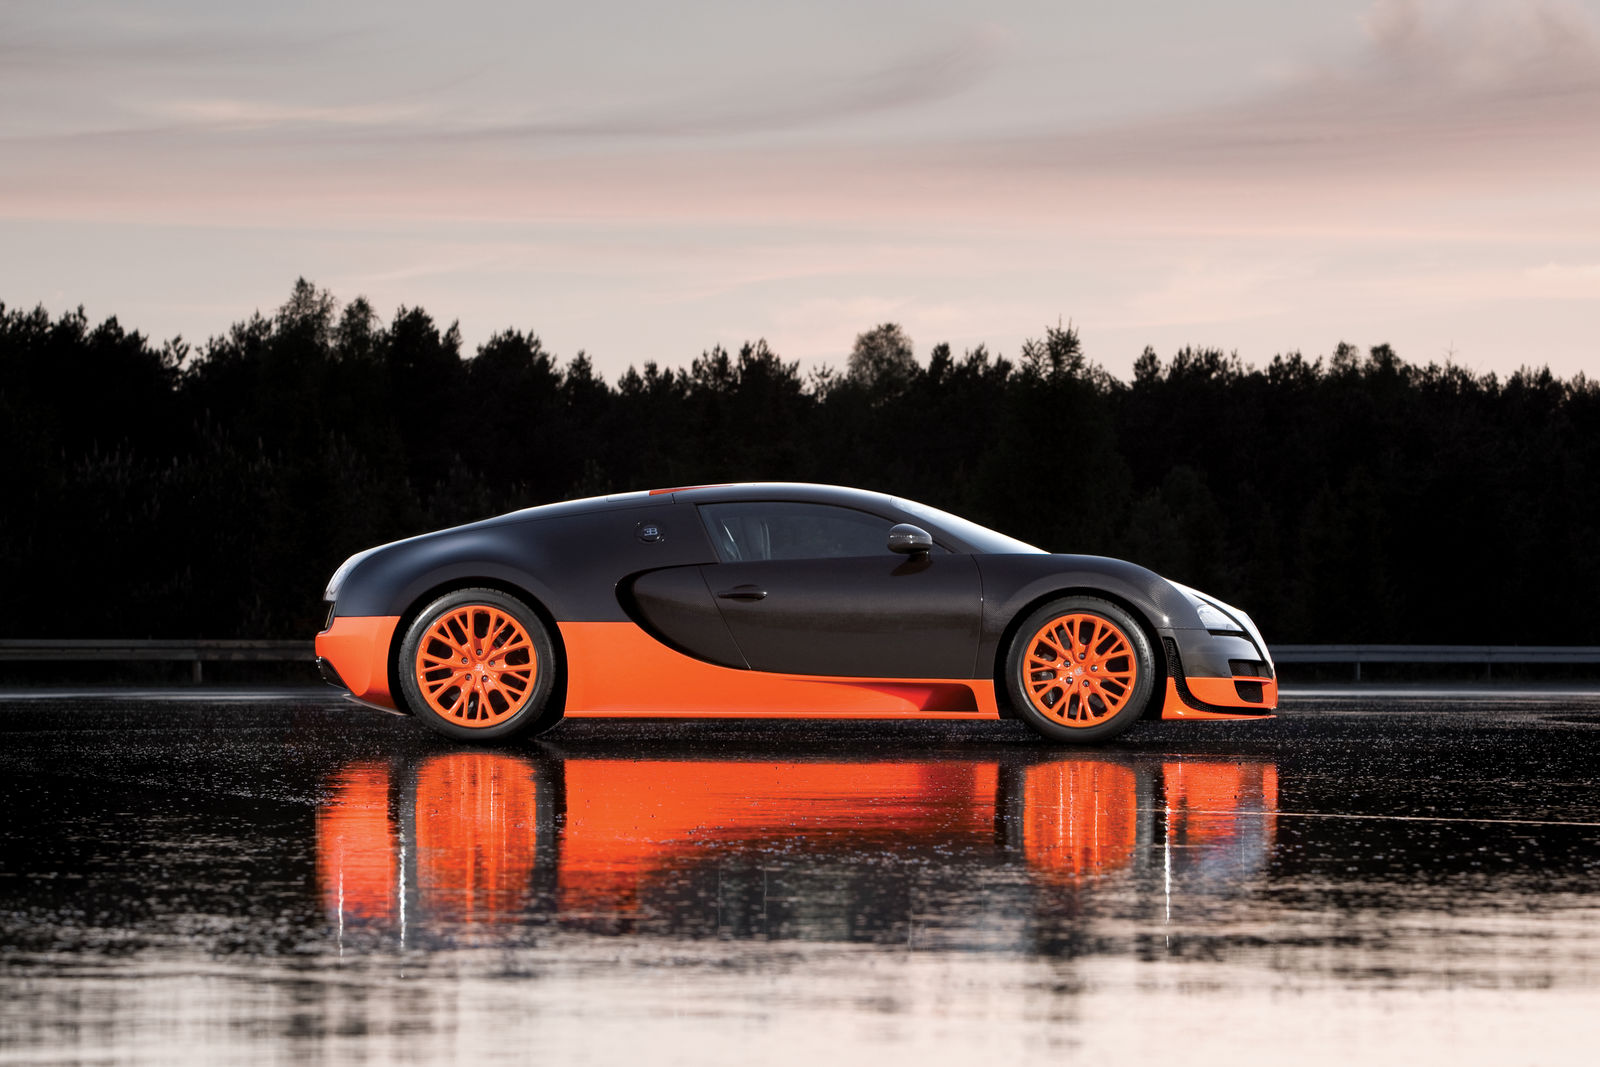 Detail Images Of A Bugatti Veyron Nomer 25